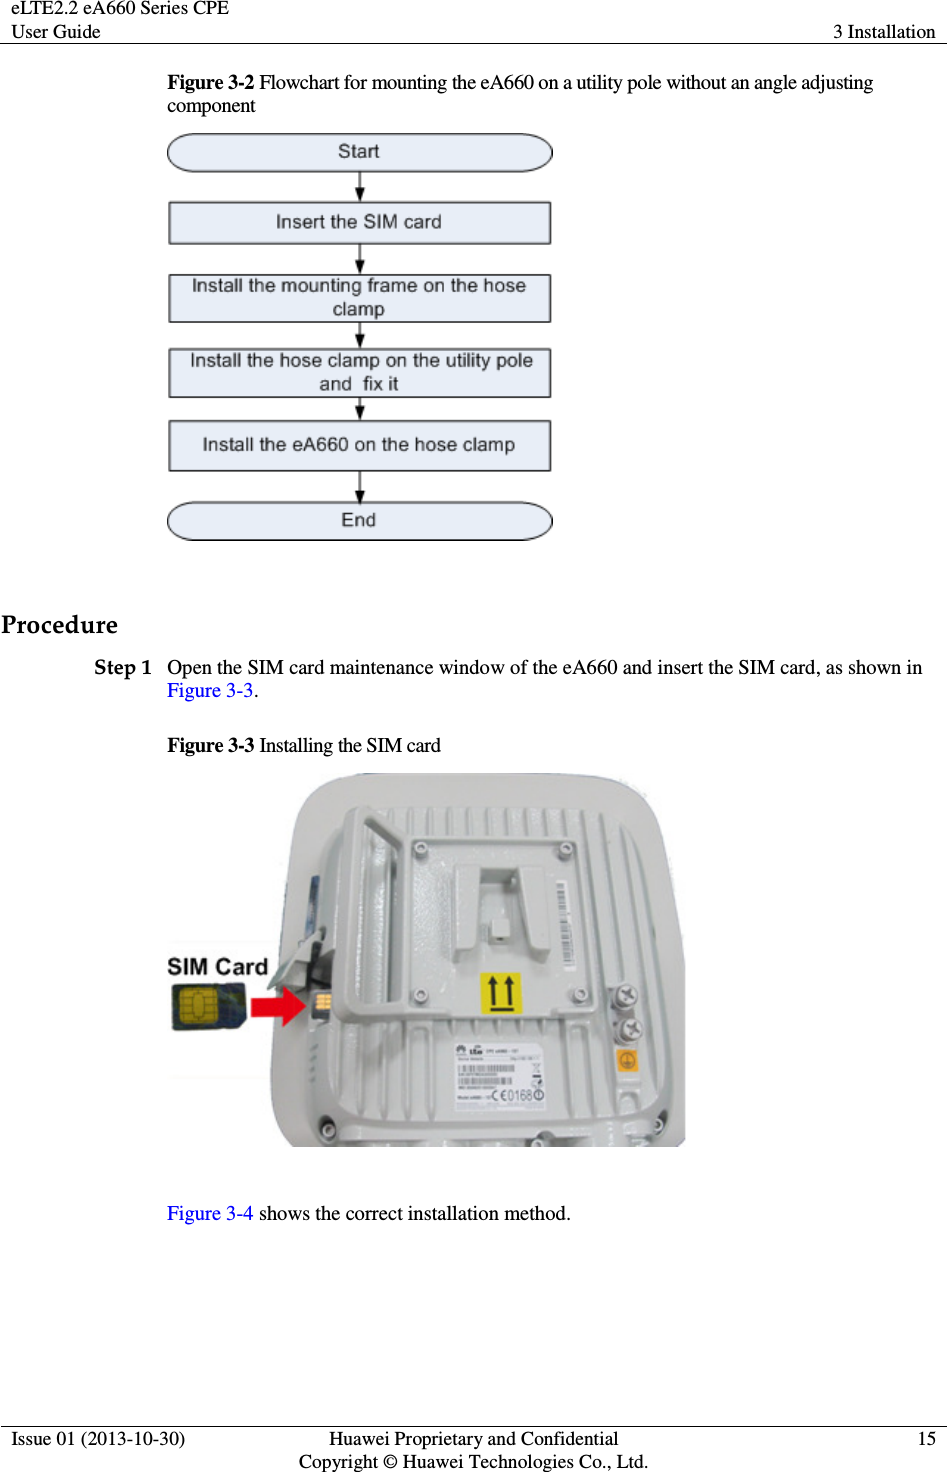 eLTE2.2 eA660 Series CPE User Guide  3 Installation  Issue 01 (2013-10-30)  Huawei Proprietary and Confidential                                     Copyright © Huawei Technologies Co., Ltd. 15  Figure 3-2 Flowchart for mounting the eA660 on a utility pole without an angle adjusting component   Procedure Step 1 Open the SIM card maintenance window of the eA660 and insert the SIM card, as shown in Figure 3-3. Figure 3-3 Installing the SIM card   Figure 3-4 shows the correct installation method. 